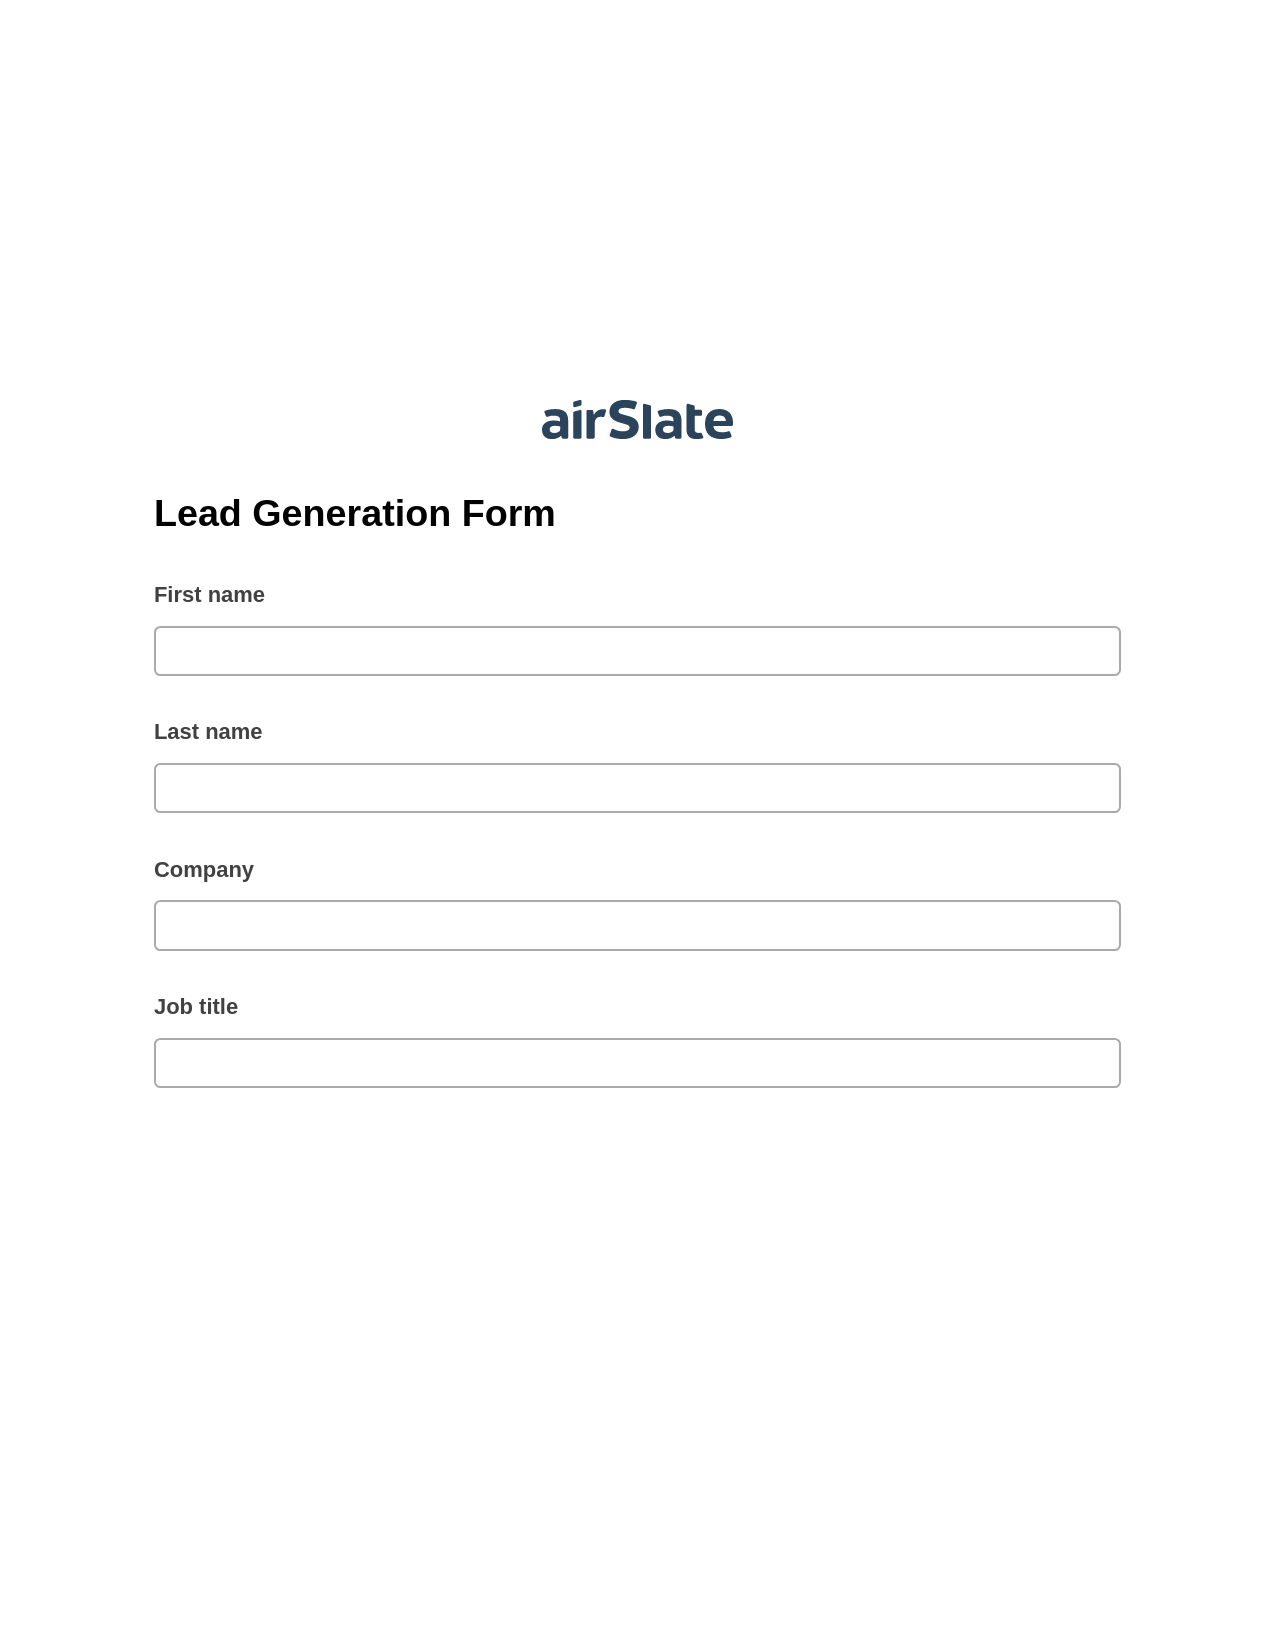 Lead Generation Form Pre-fill from Salesforce Records Bot, Remove Tags From Slate Bot, Archive to Box Bot